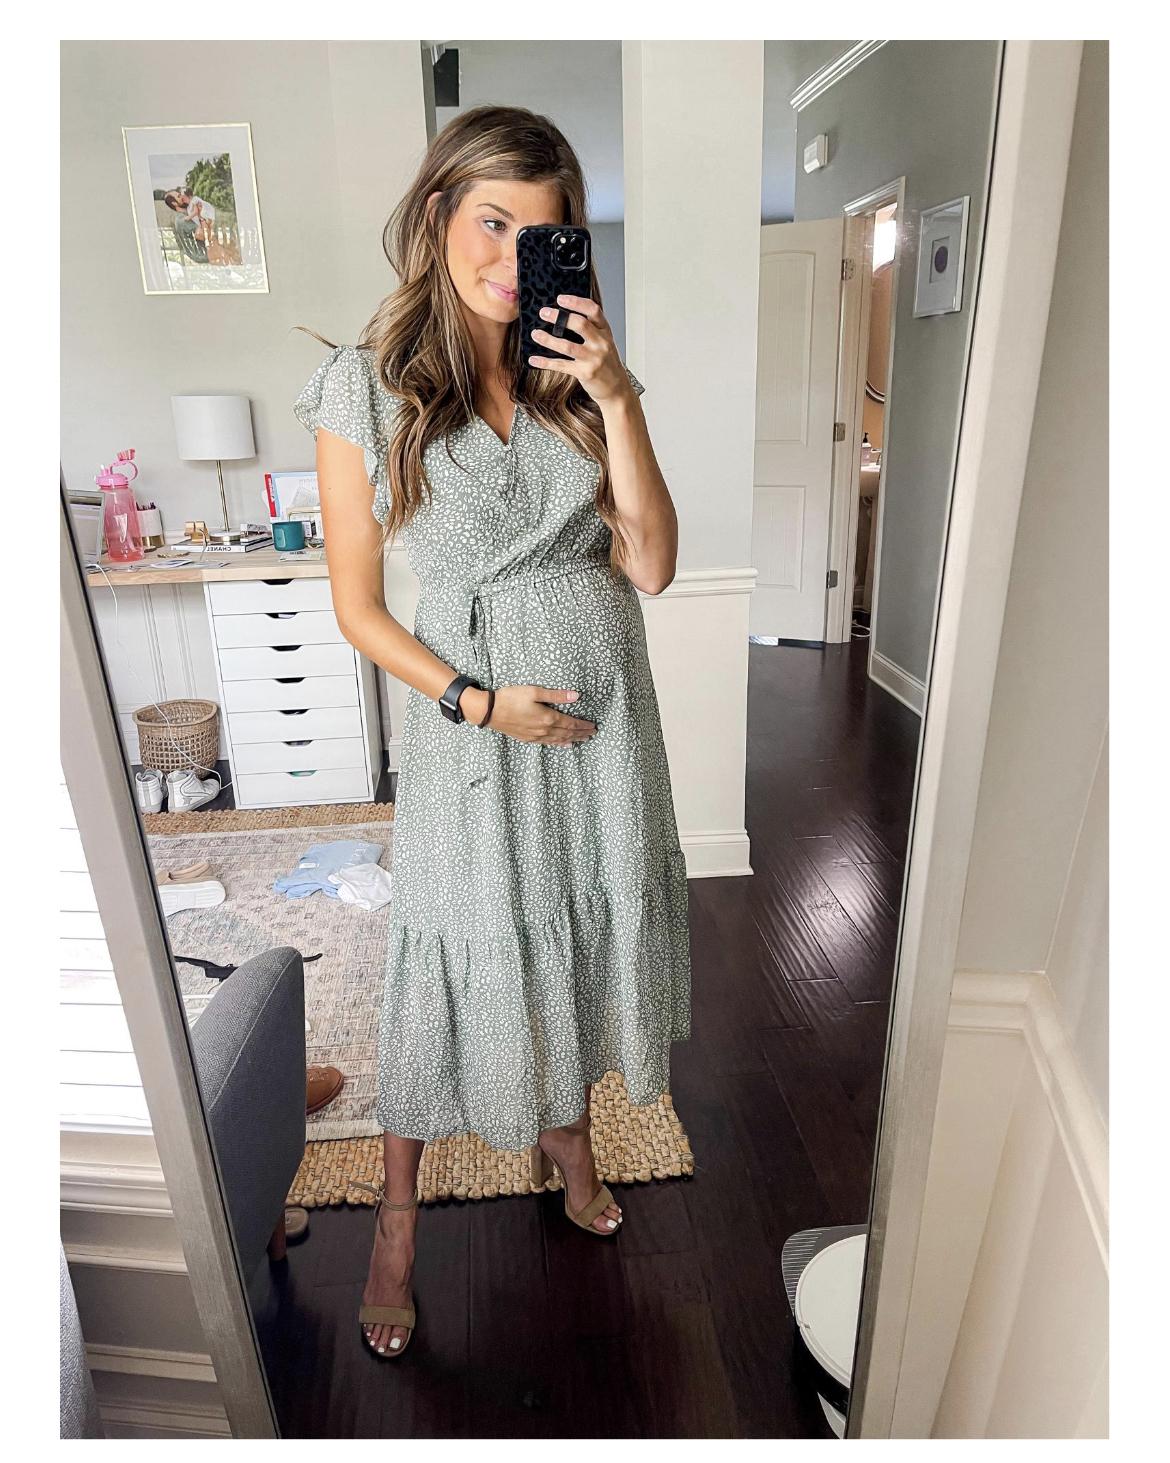 amazon dress that works great for maternity